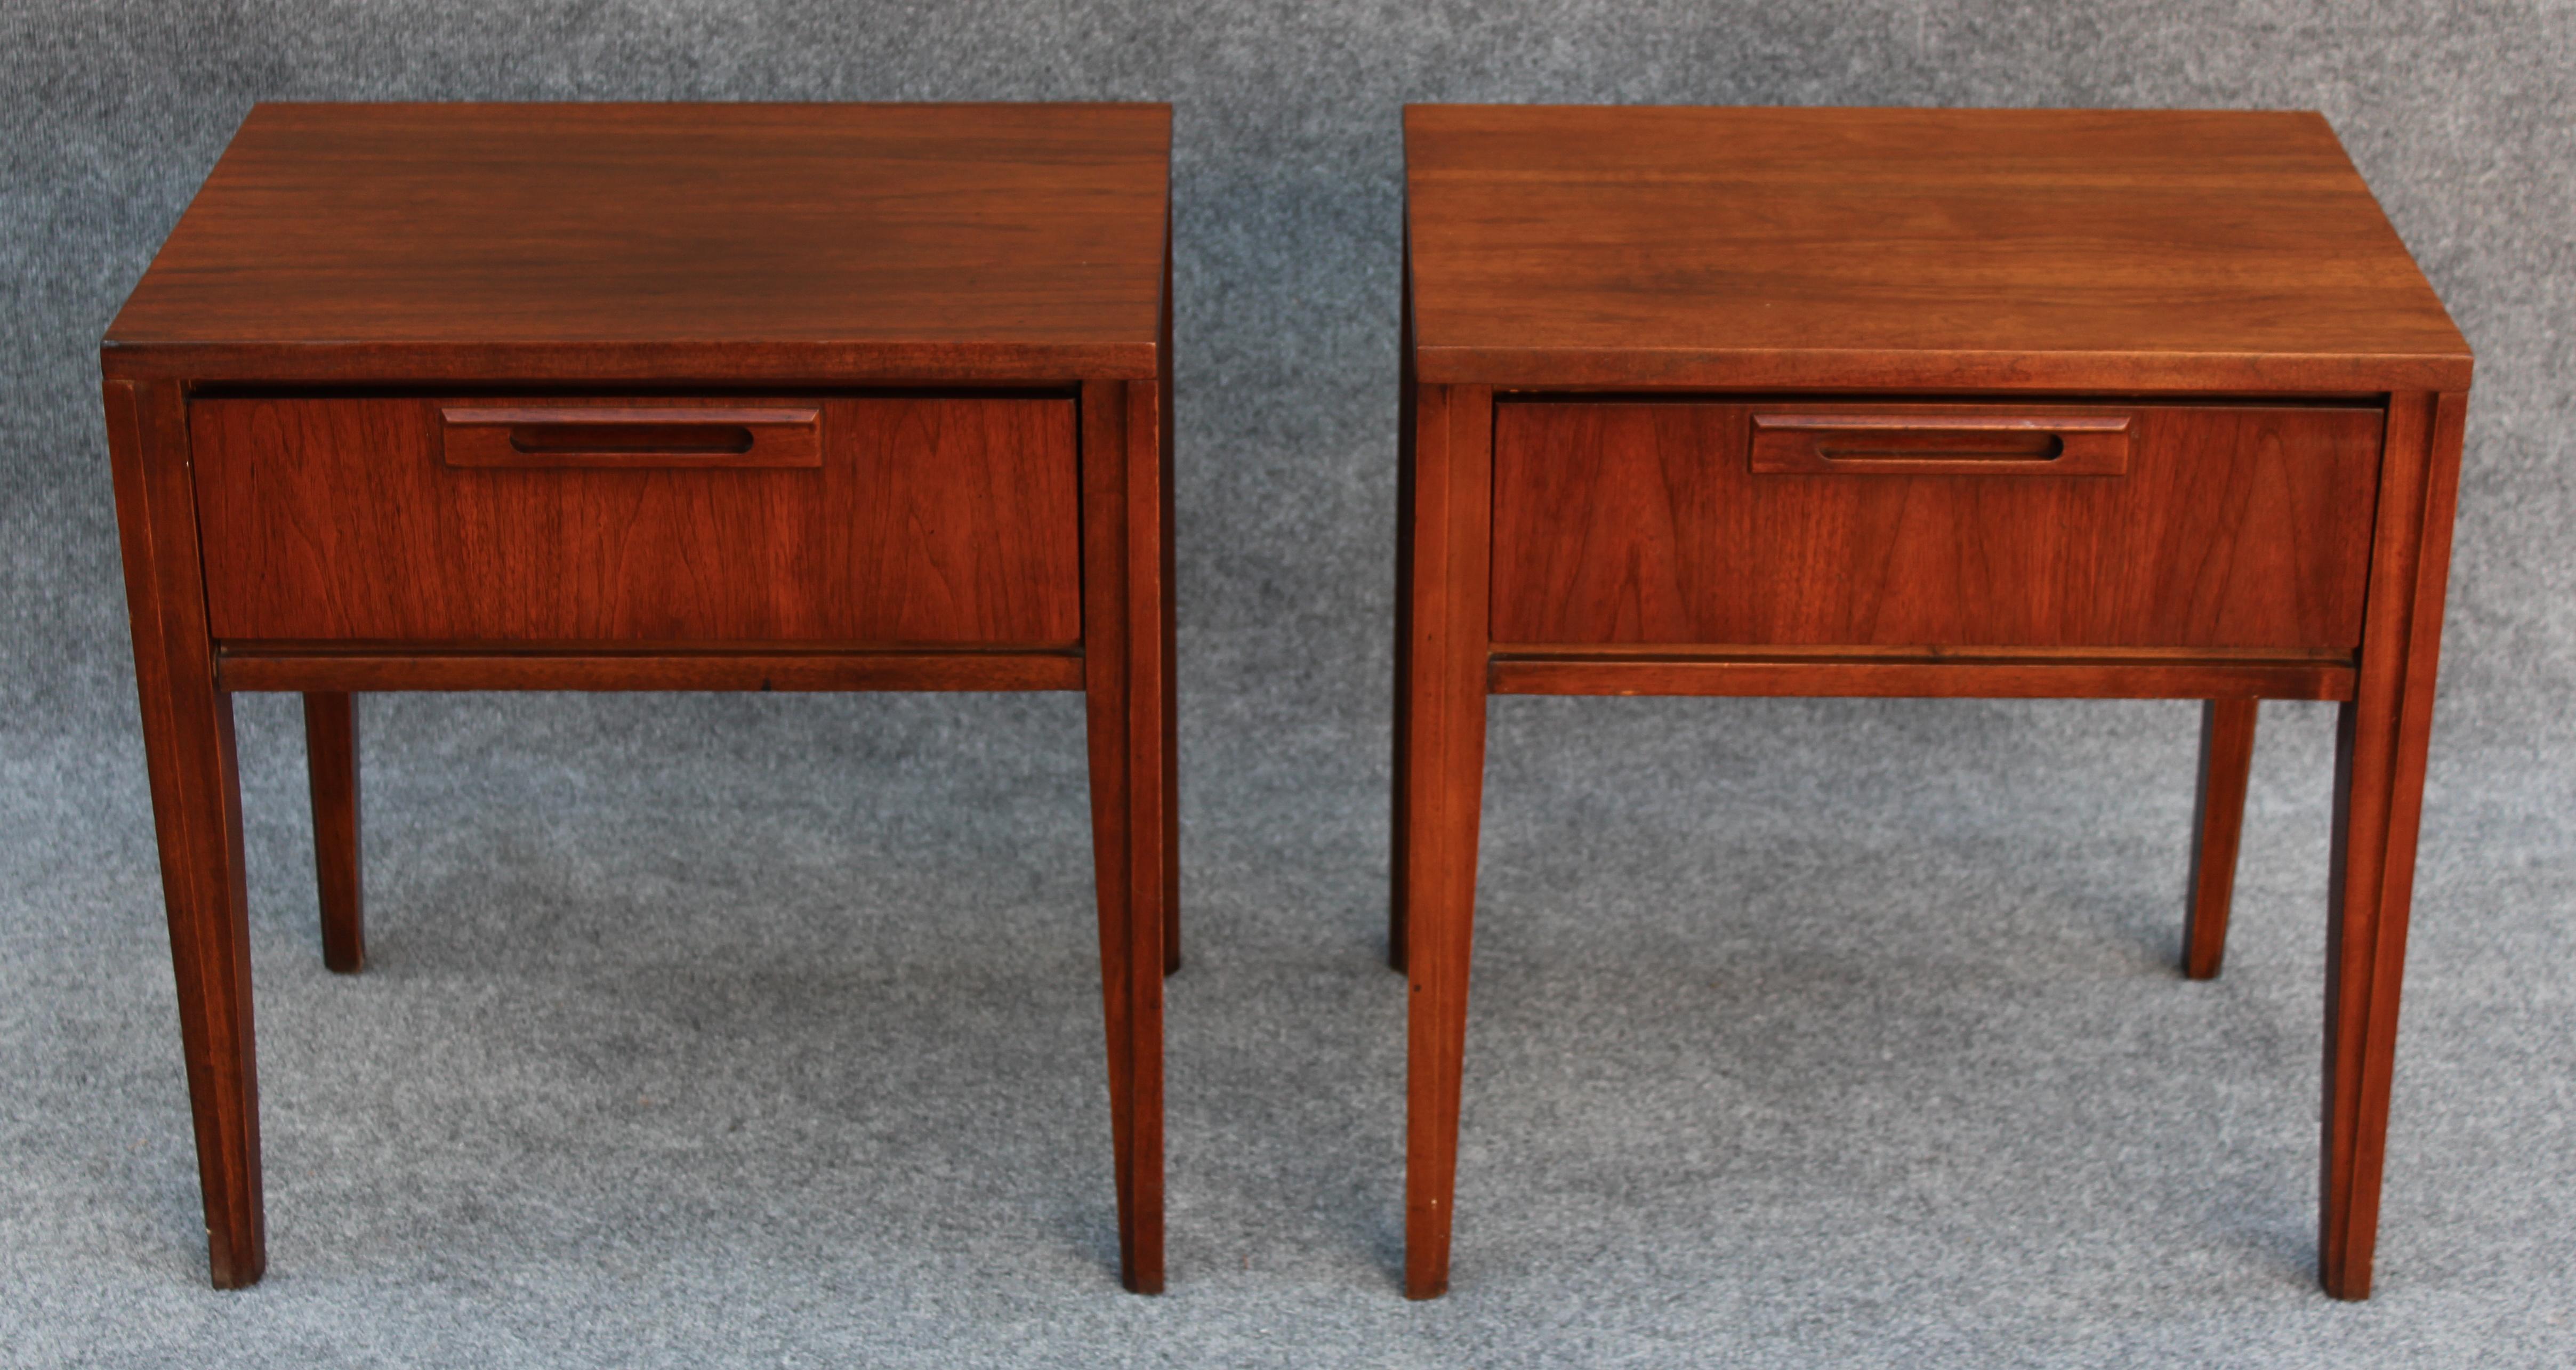 This pair of nightstands was made by United Furniture, manufacturers of the very successful Diamond Front line, and cover all the bases required for a great pair of nightstands. Featuring a simple design, each leg tapers elegantly towards the bottom